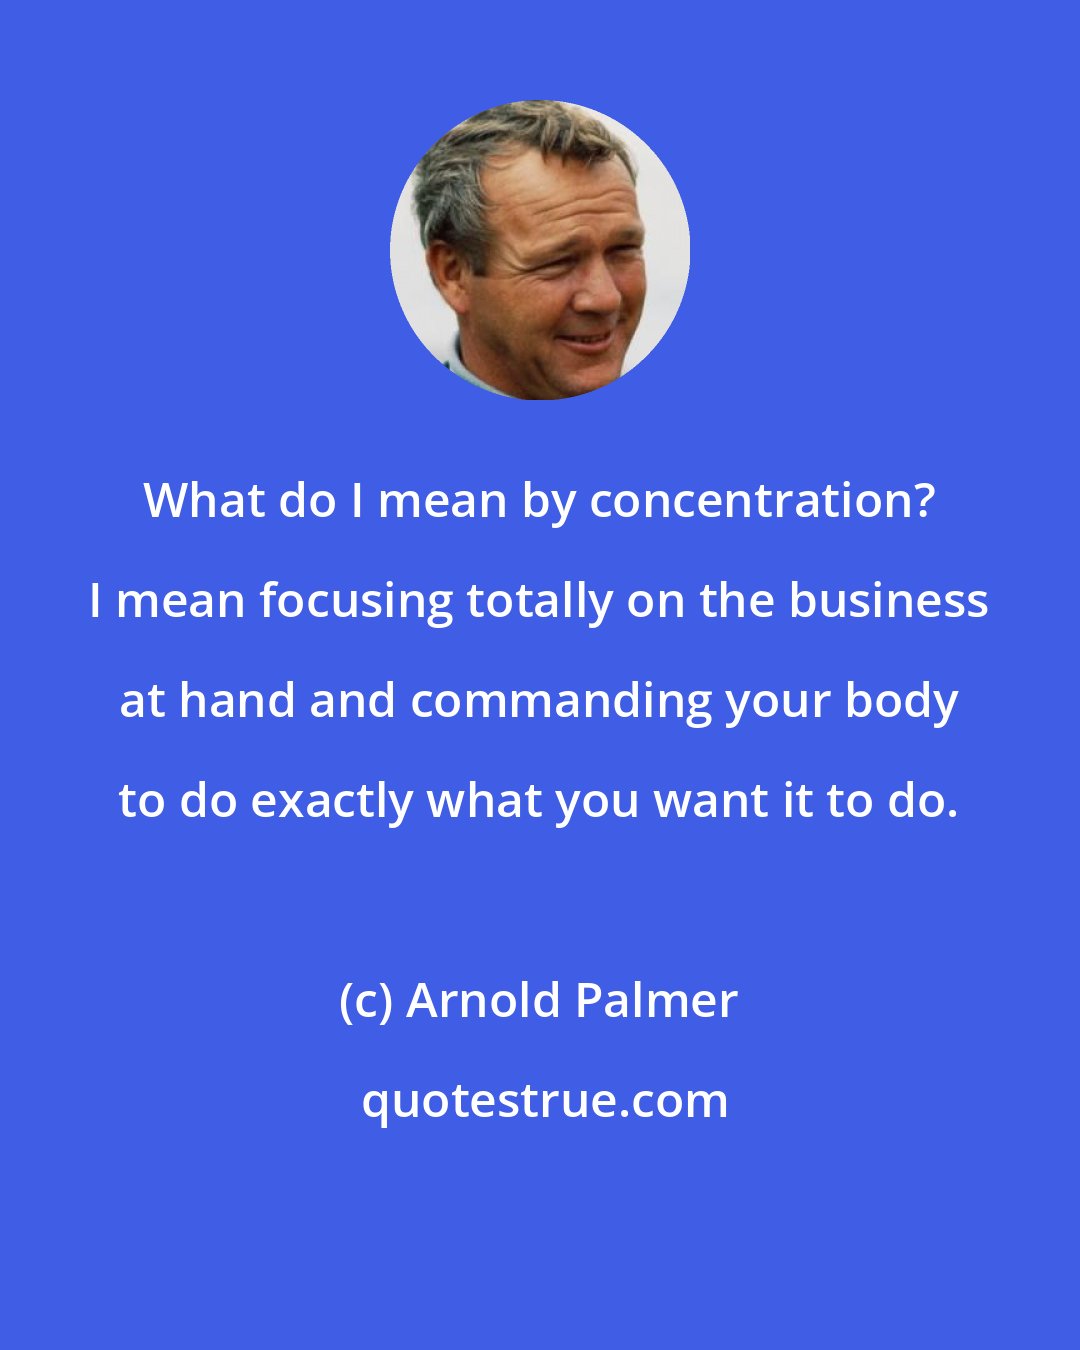 Arnold Palmer: What do I mean by concentration? I mean focusing totally on the business at hand and commanding your body to do exactly what you want it to do.